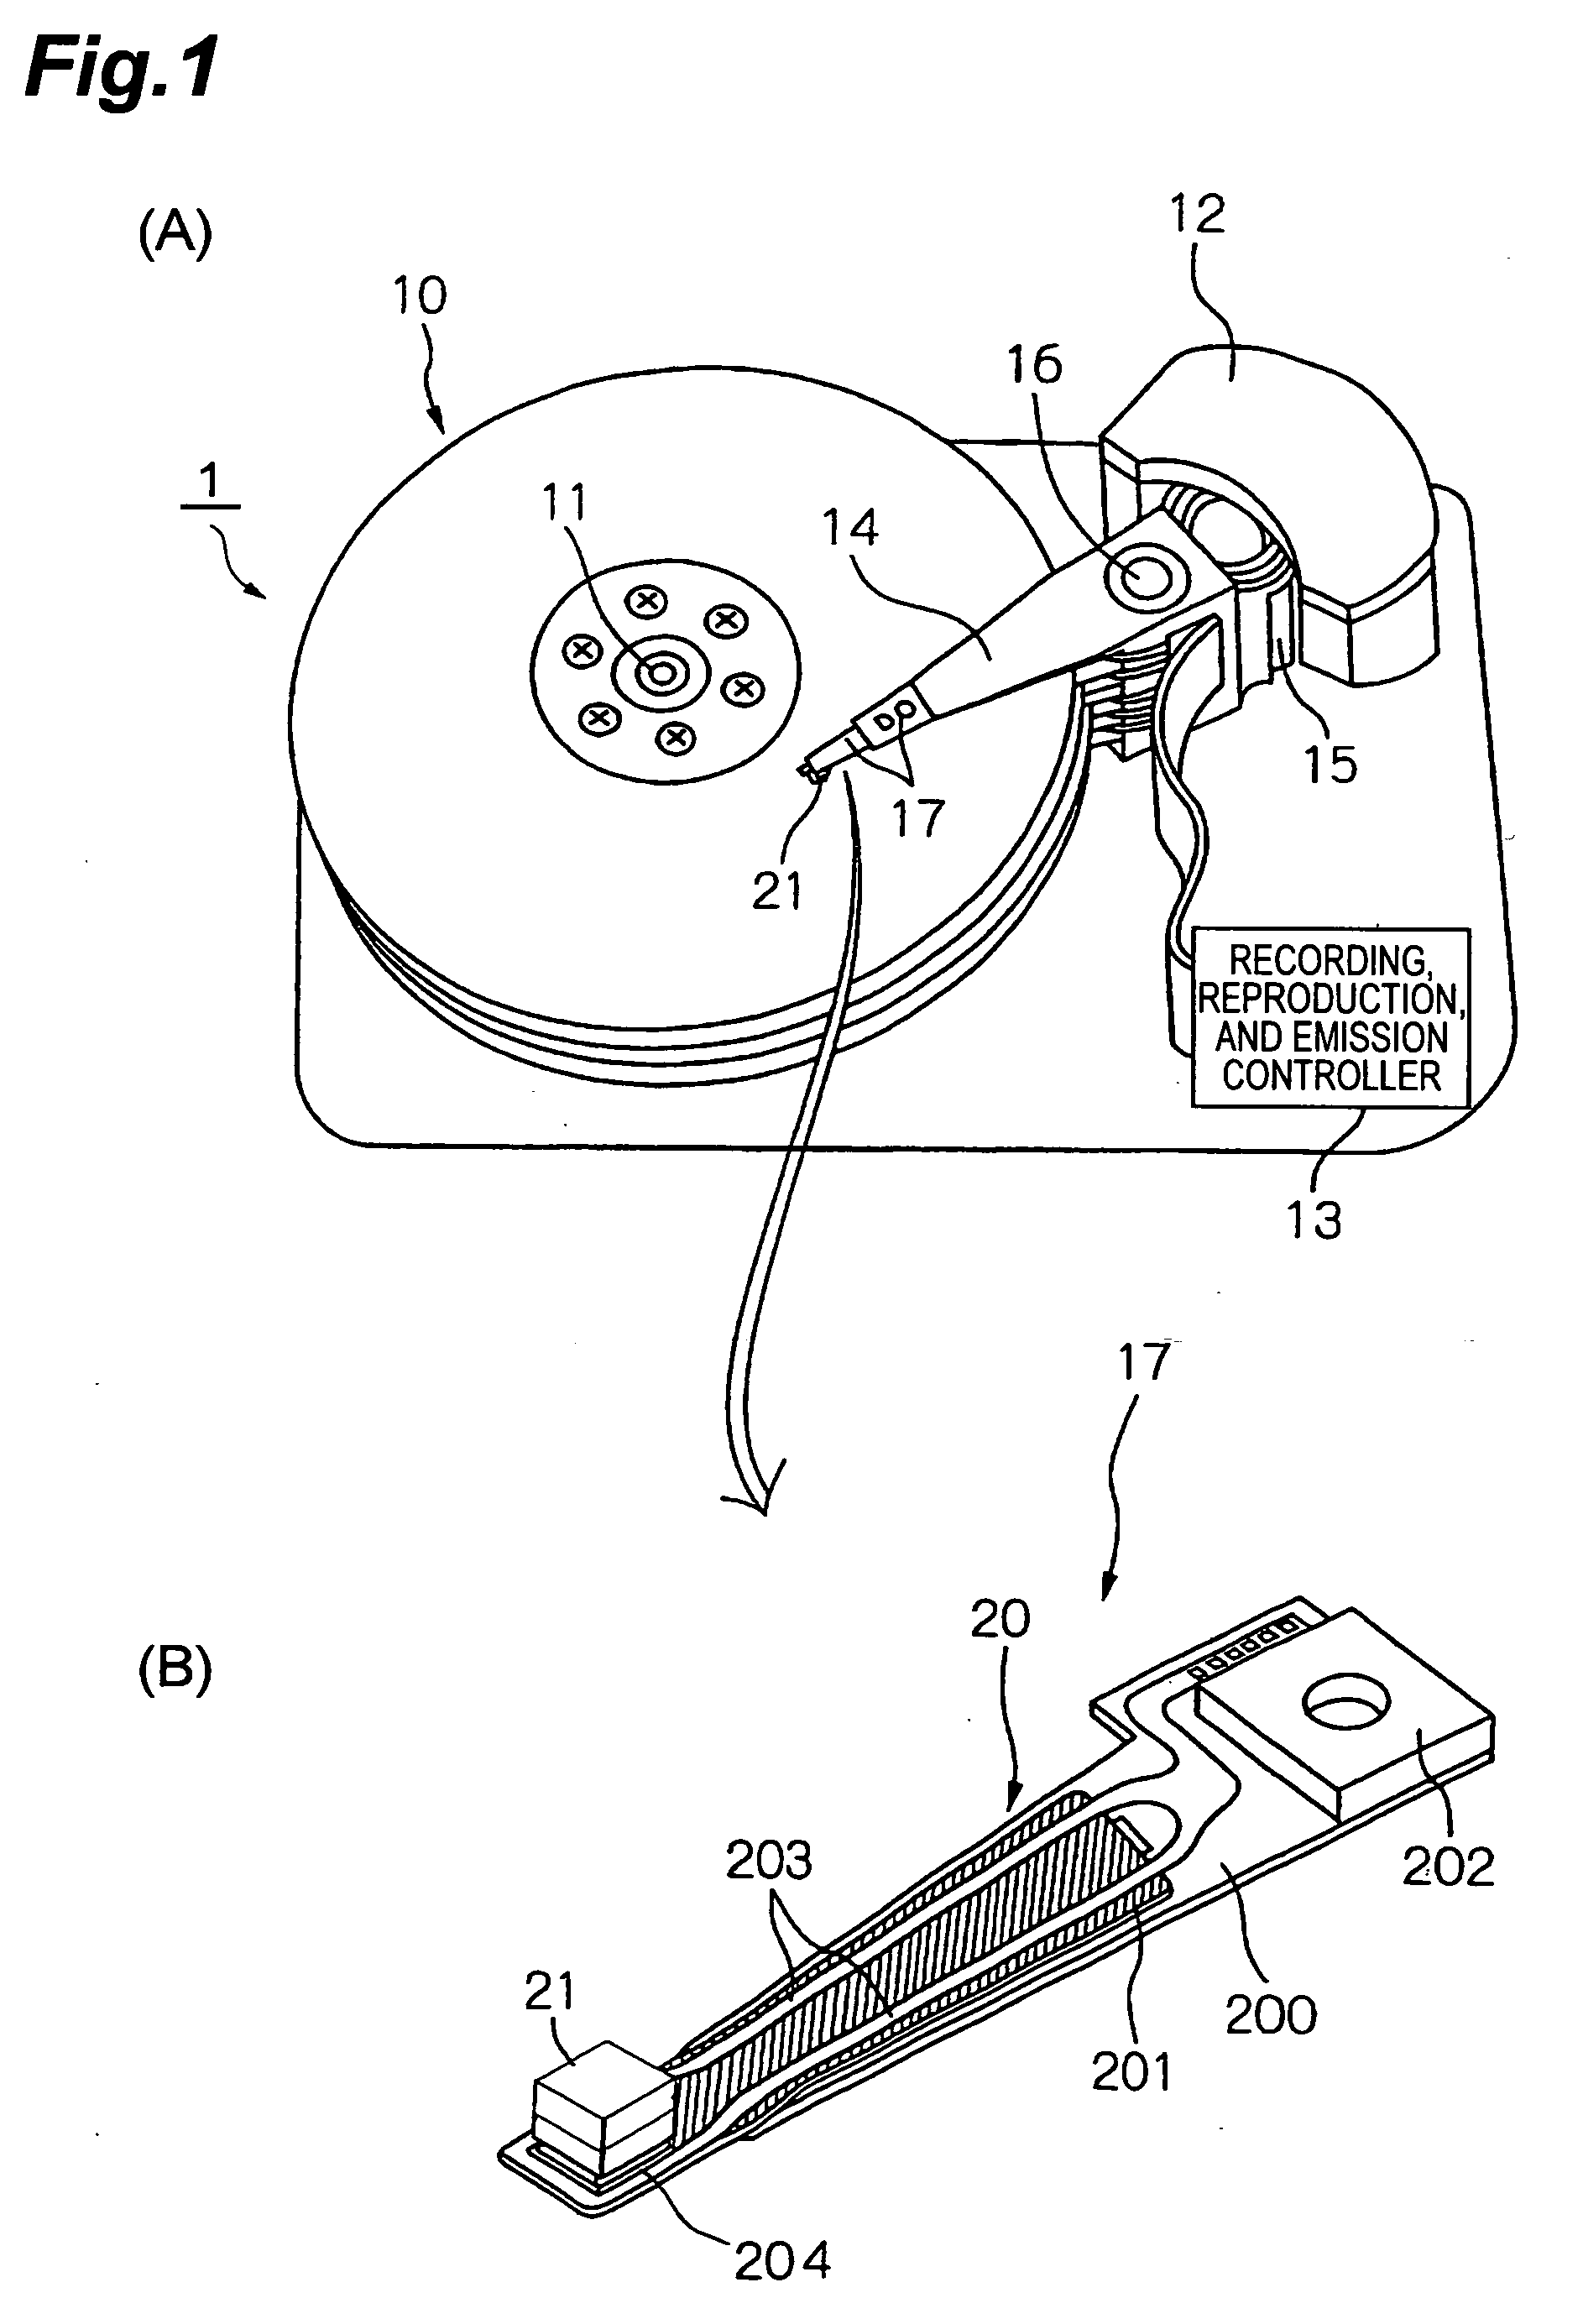 Near-field light generator plate, thermally assisted magnetic head, head gimbal assembly, and hard disk drive